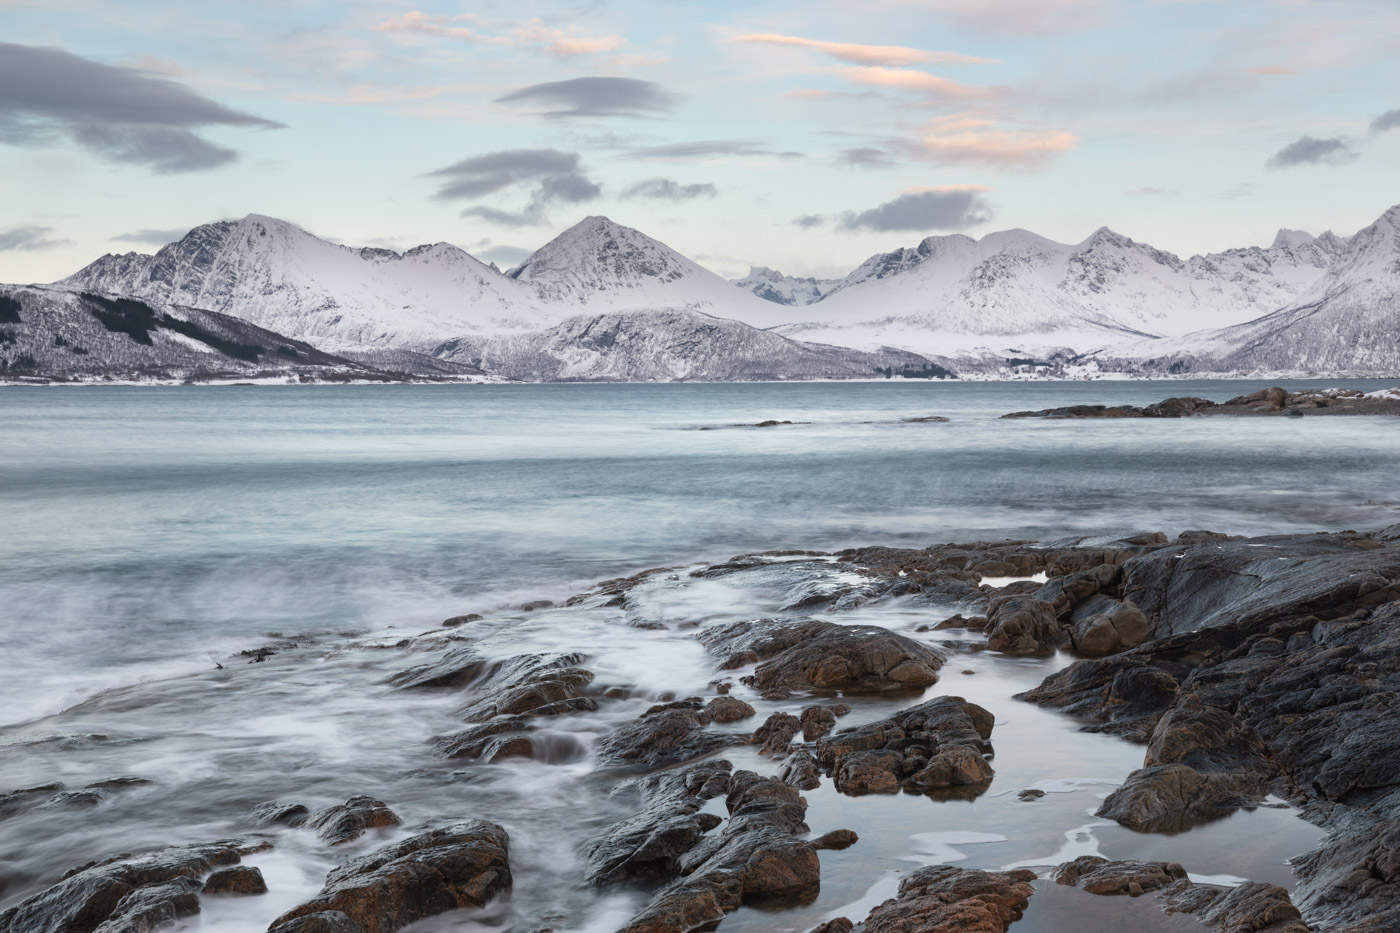 Snow covered mountains around the coastline near the island of Sommaroy